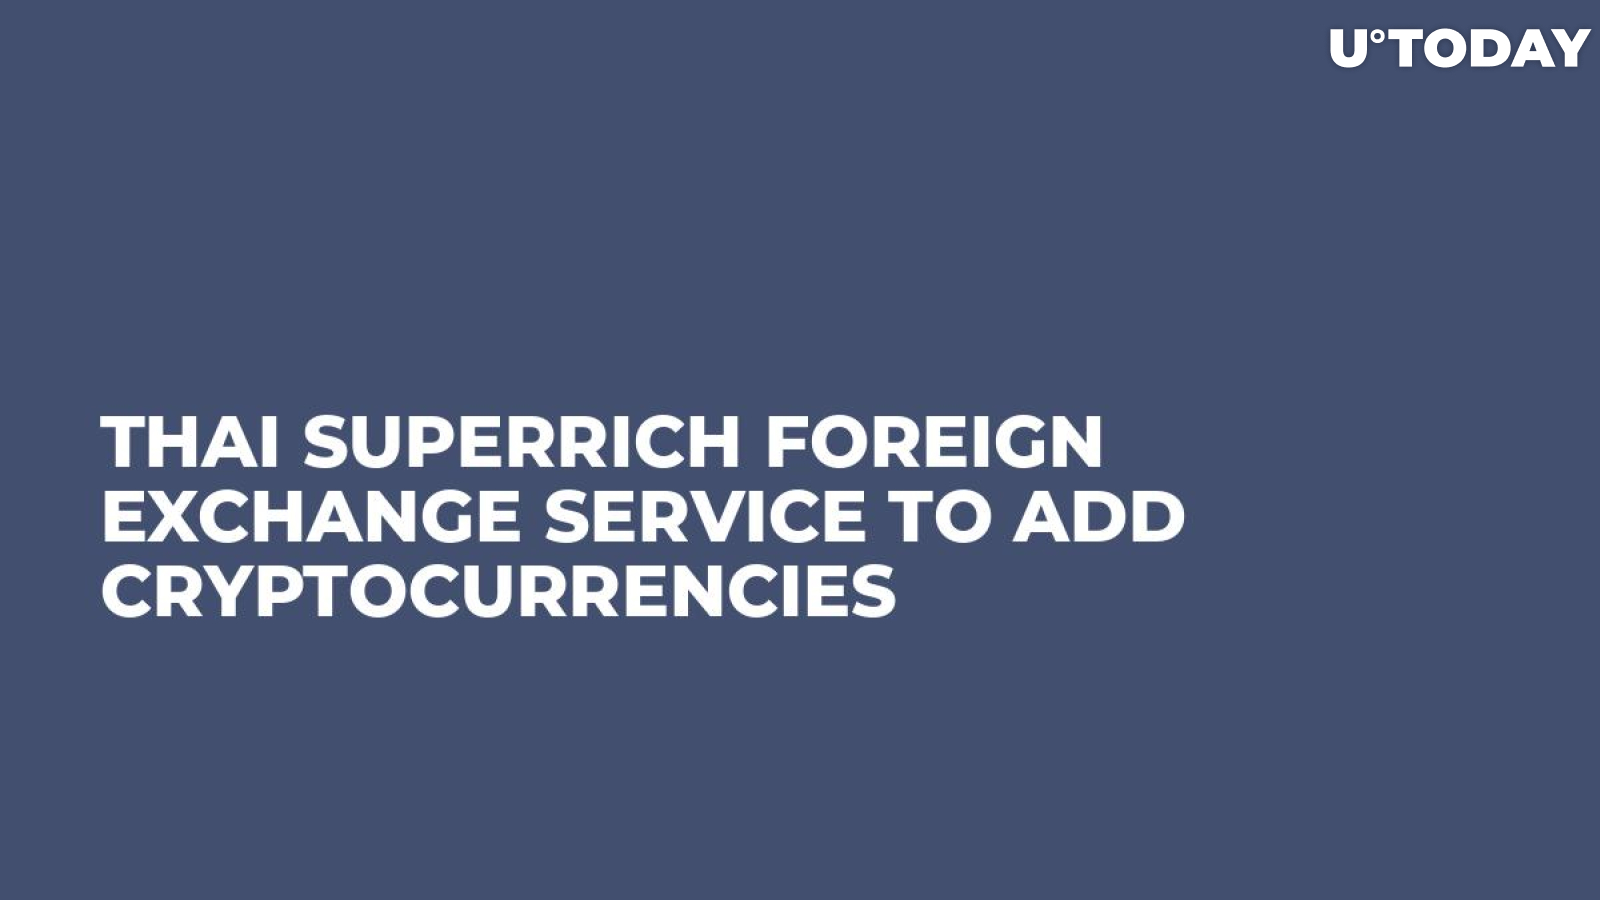 Thai Superrich Foreign Exchange Service To Add Cryptocurrencies